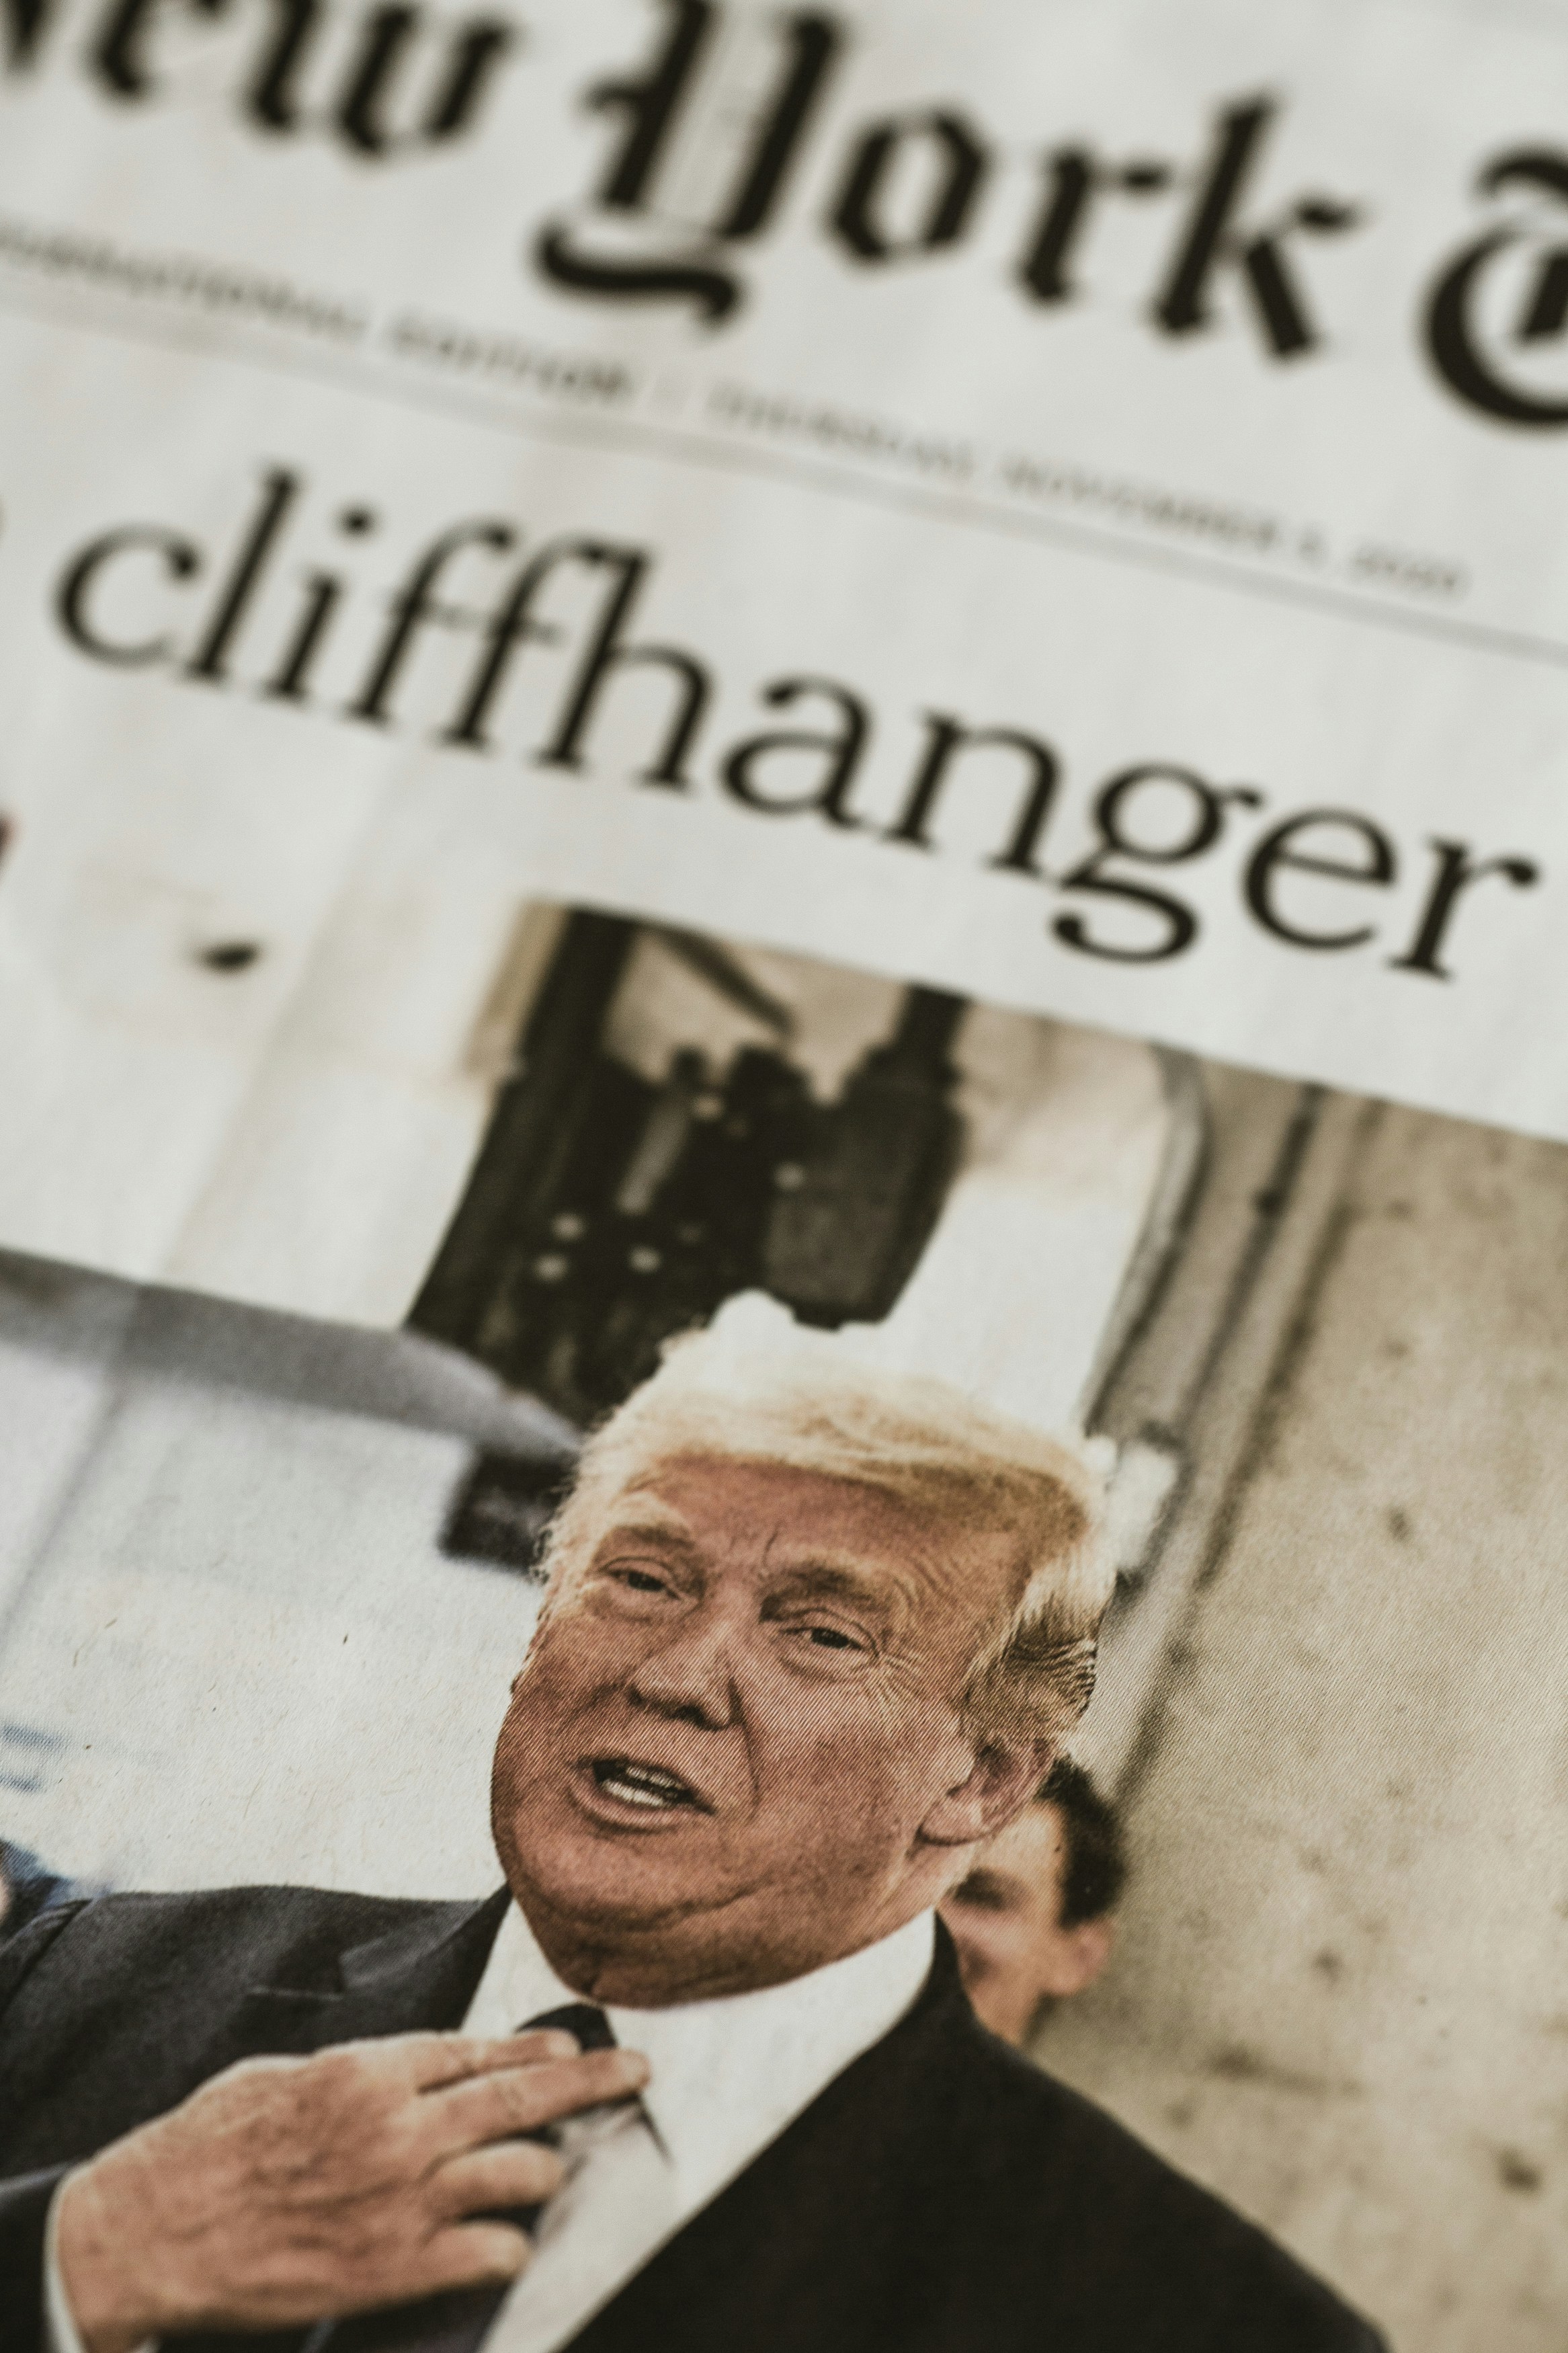 International daily newspaper from Thursday 5th November 2020 – Le Monde (France) \u0026 The New York Times (USA) – After the election report. Made with analog vintage lens, Leica APO Macro Elmarit-R 2.8 100mm (Year: 1993)